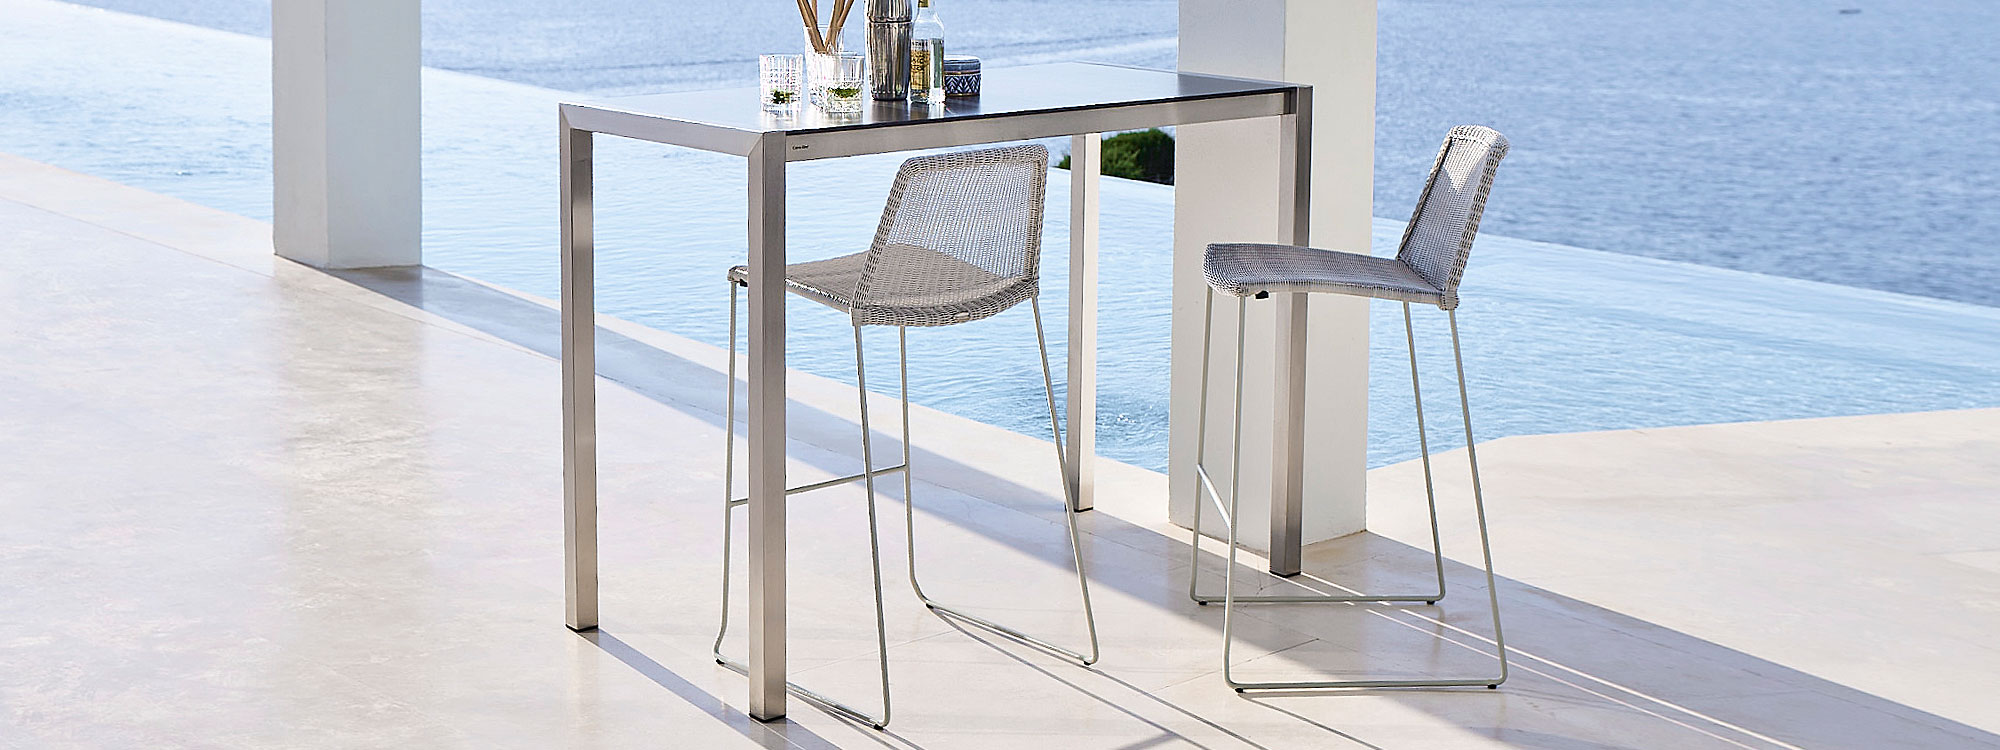 Drop bar table & Breeze modern bar stool is a contemporary outdoor bar chair in luxury quality garden furniture materials by Cane-Line modern garden furniture company